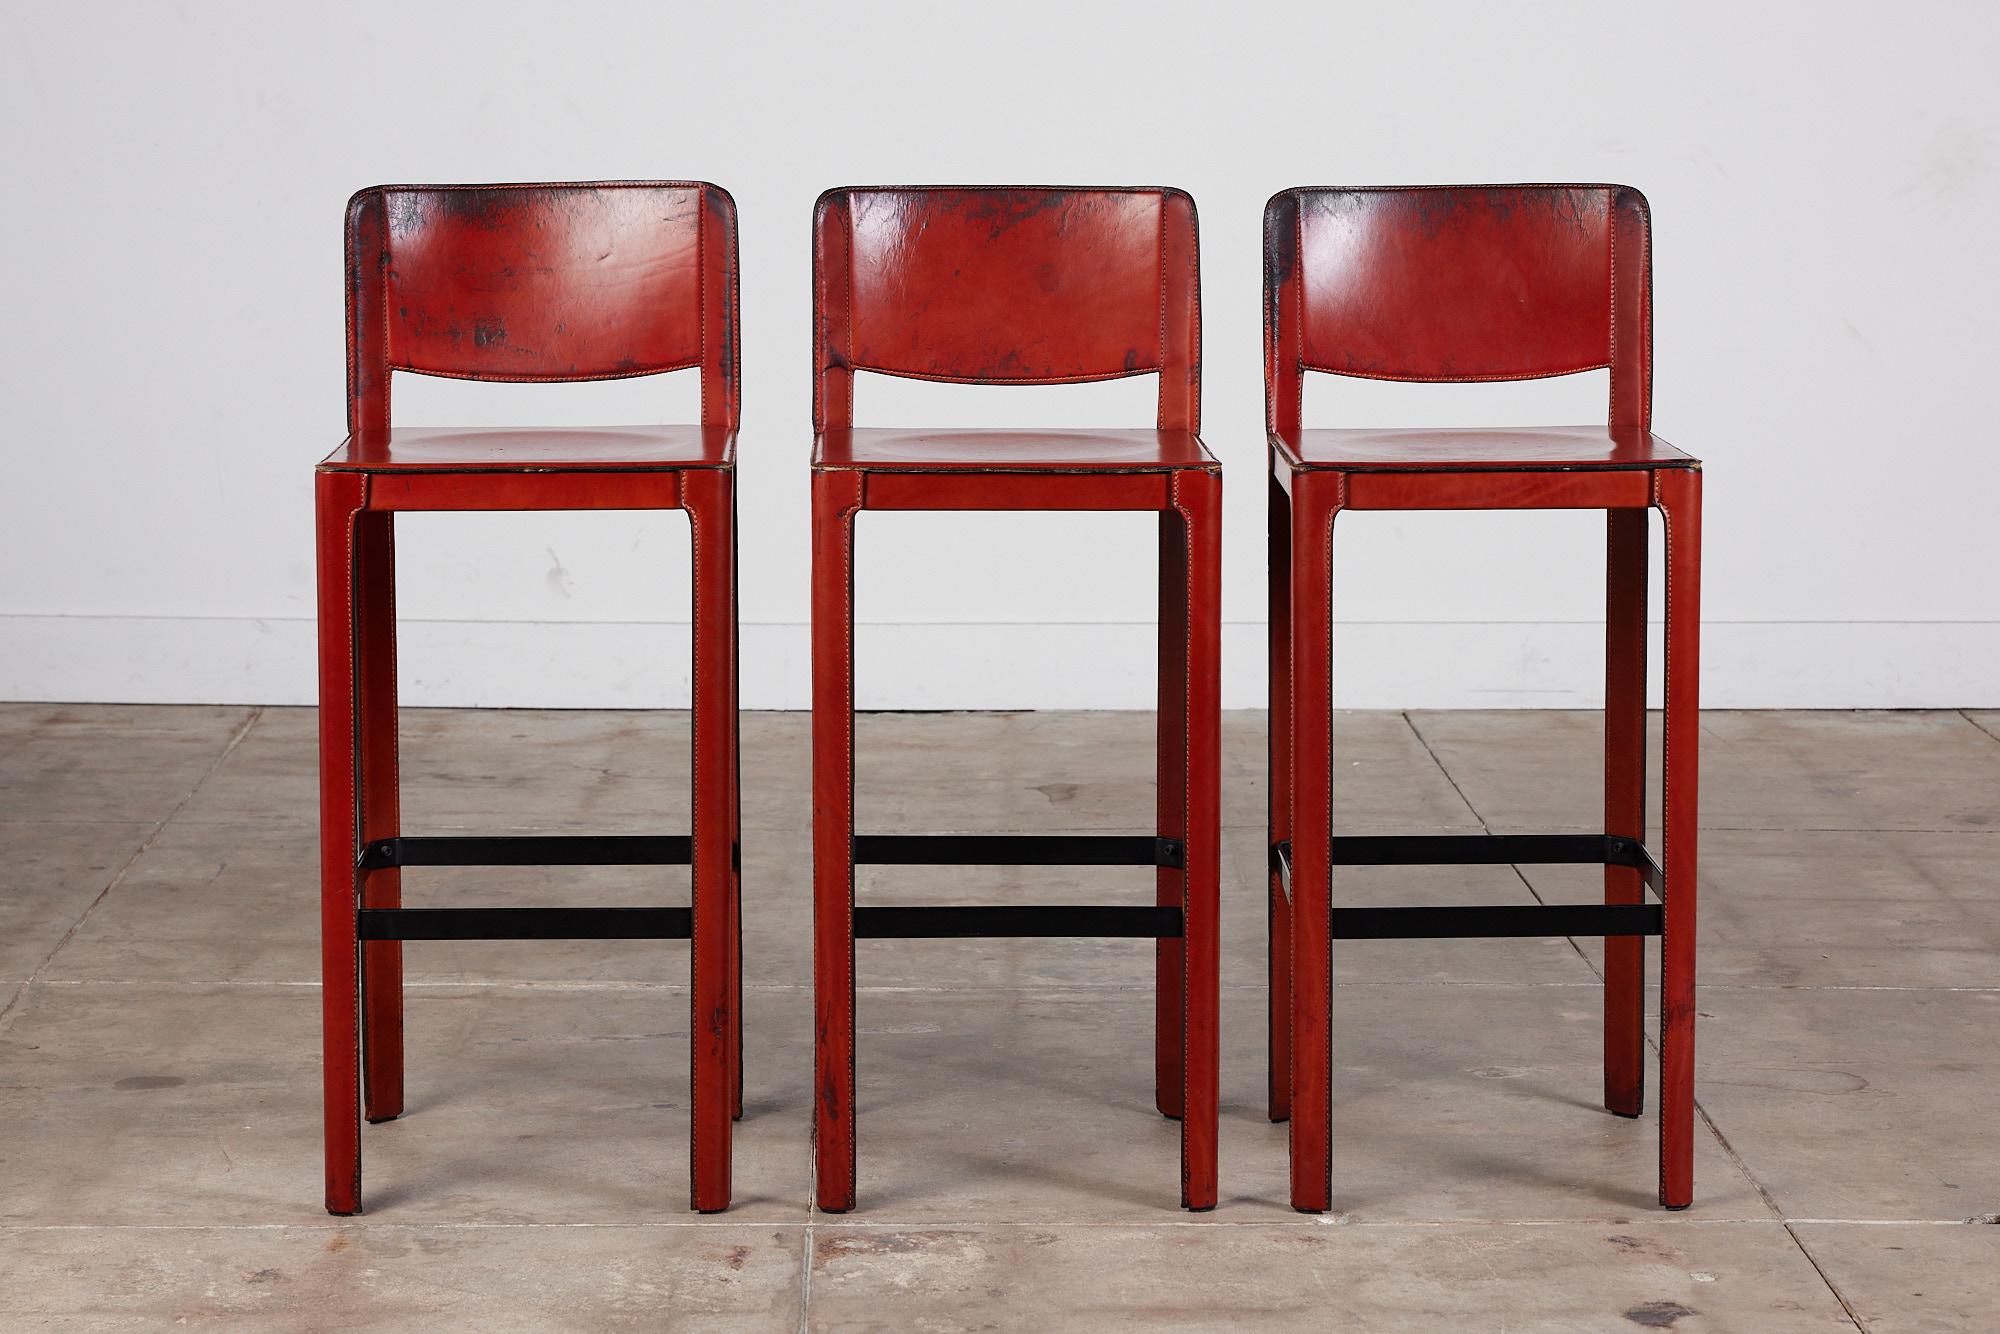 Matteo Grassi bar stool c.1980s, Italy, features a patinated reddish orange saddle leather which is wrapped atop a steel frame with stitched detailing. A black enameled square metal support bar connects all four legs and can be used as a footrest.